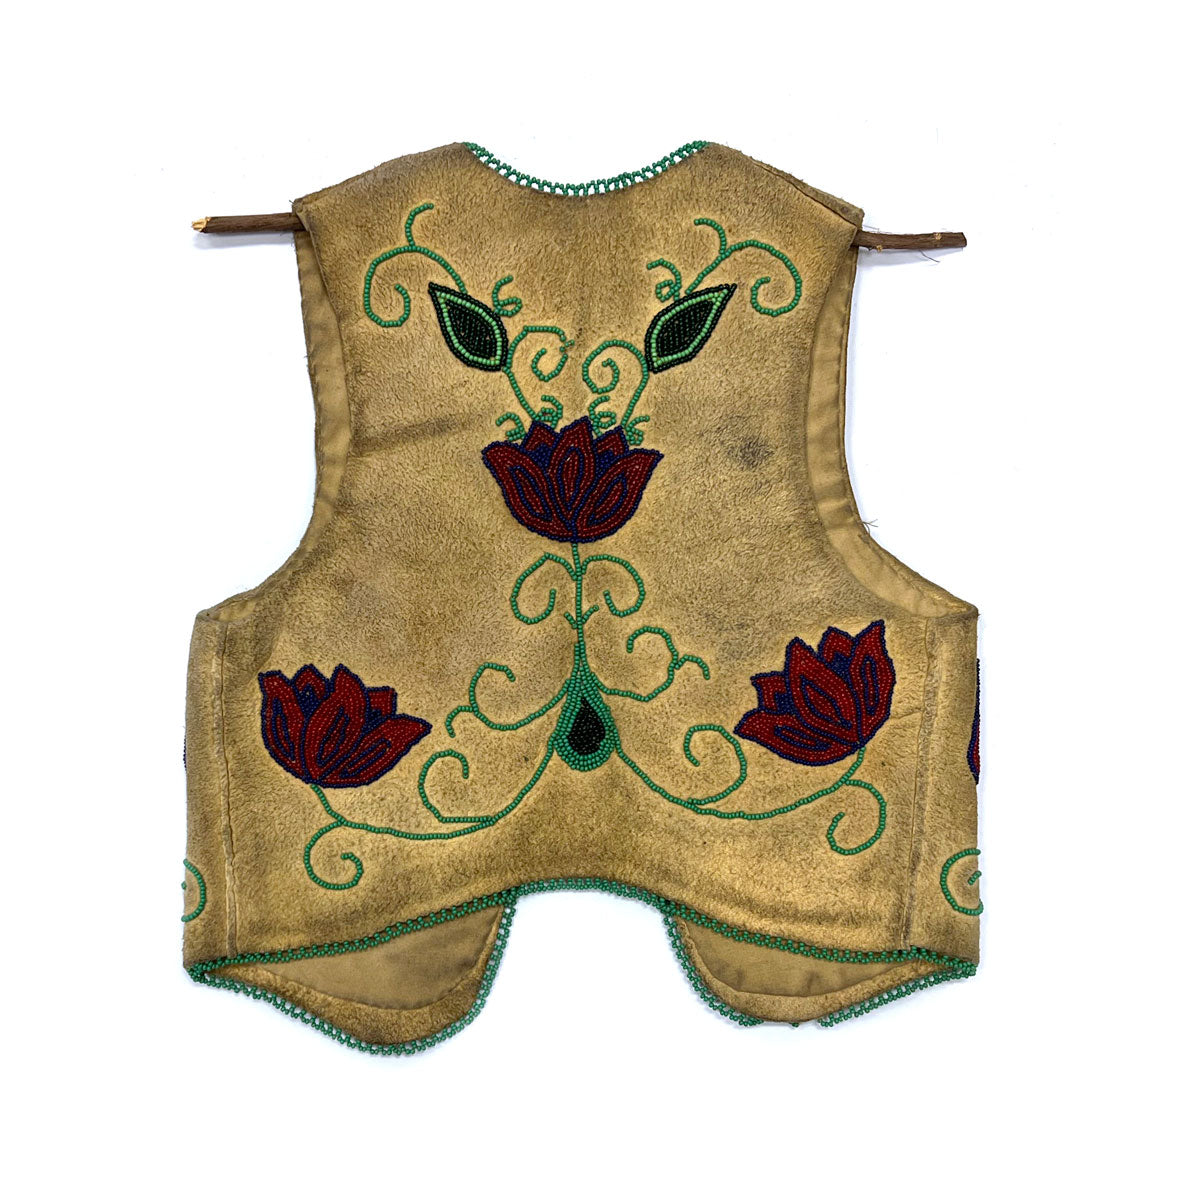 Plateau Beaded Leather Chilld's Vest with Floral Design c. 1920-30s, 15" x 13" (DW1317)